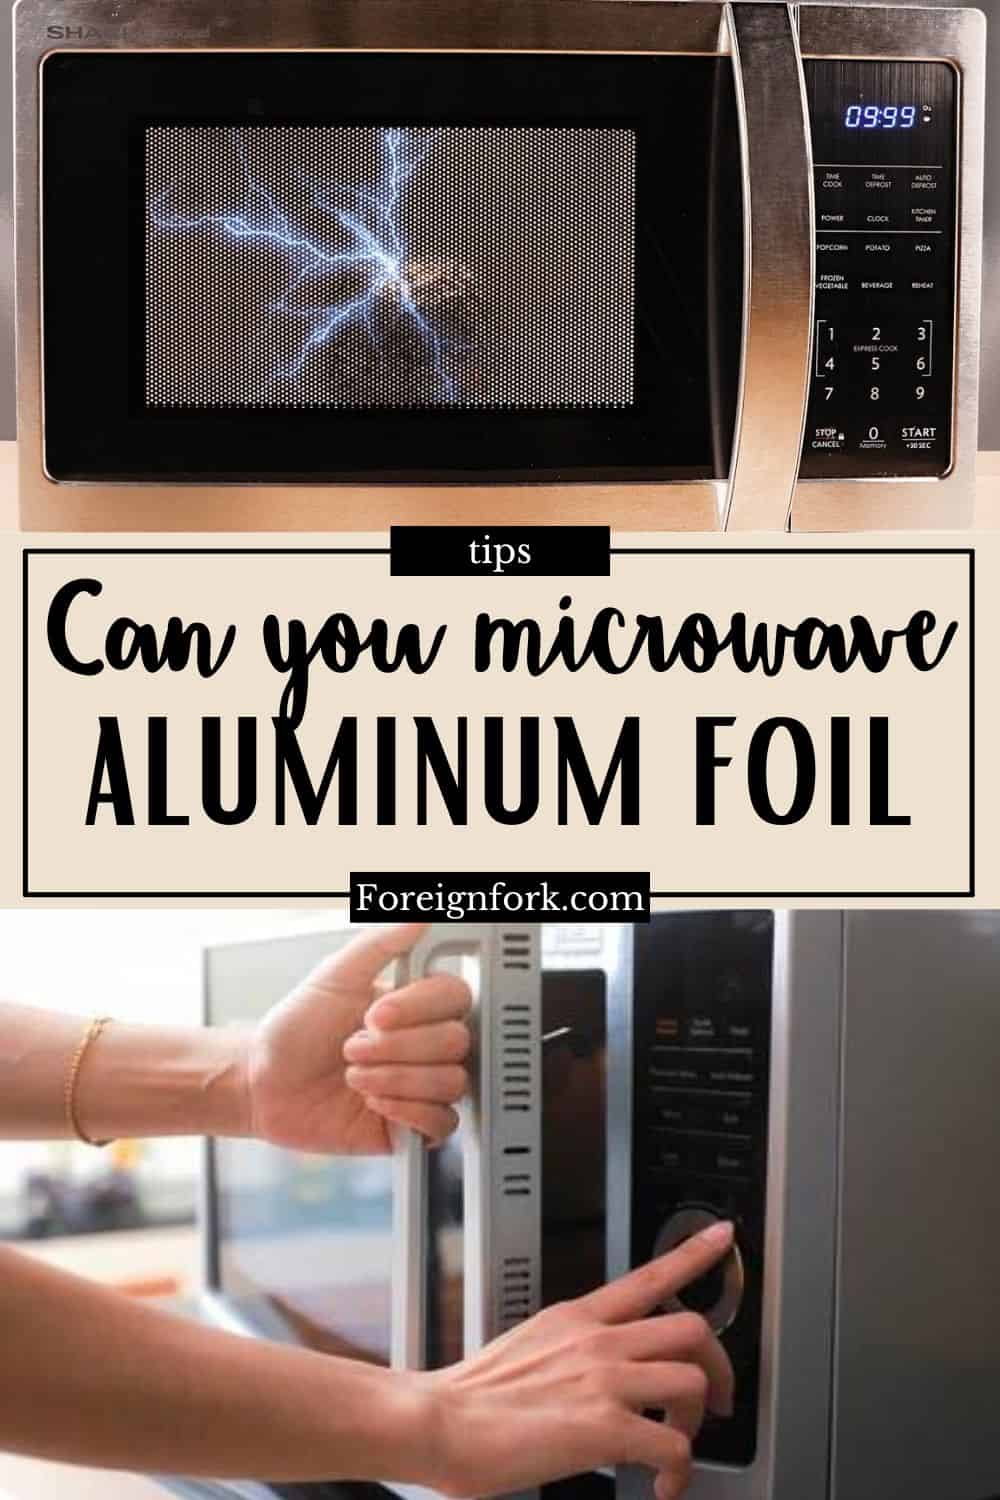 A pinterest image with text that says "can you microwave aluminum foil" with photos of microwaves on it.